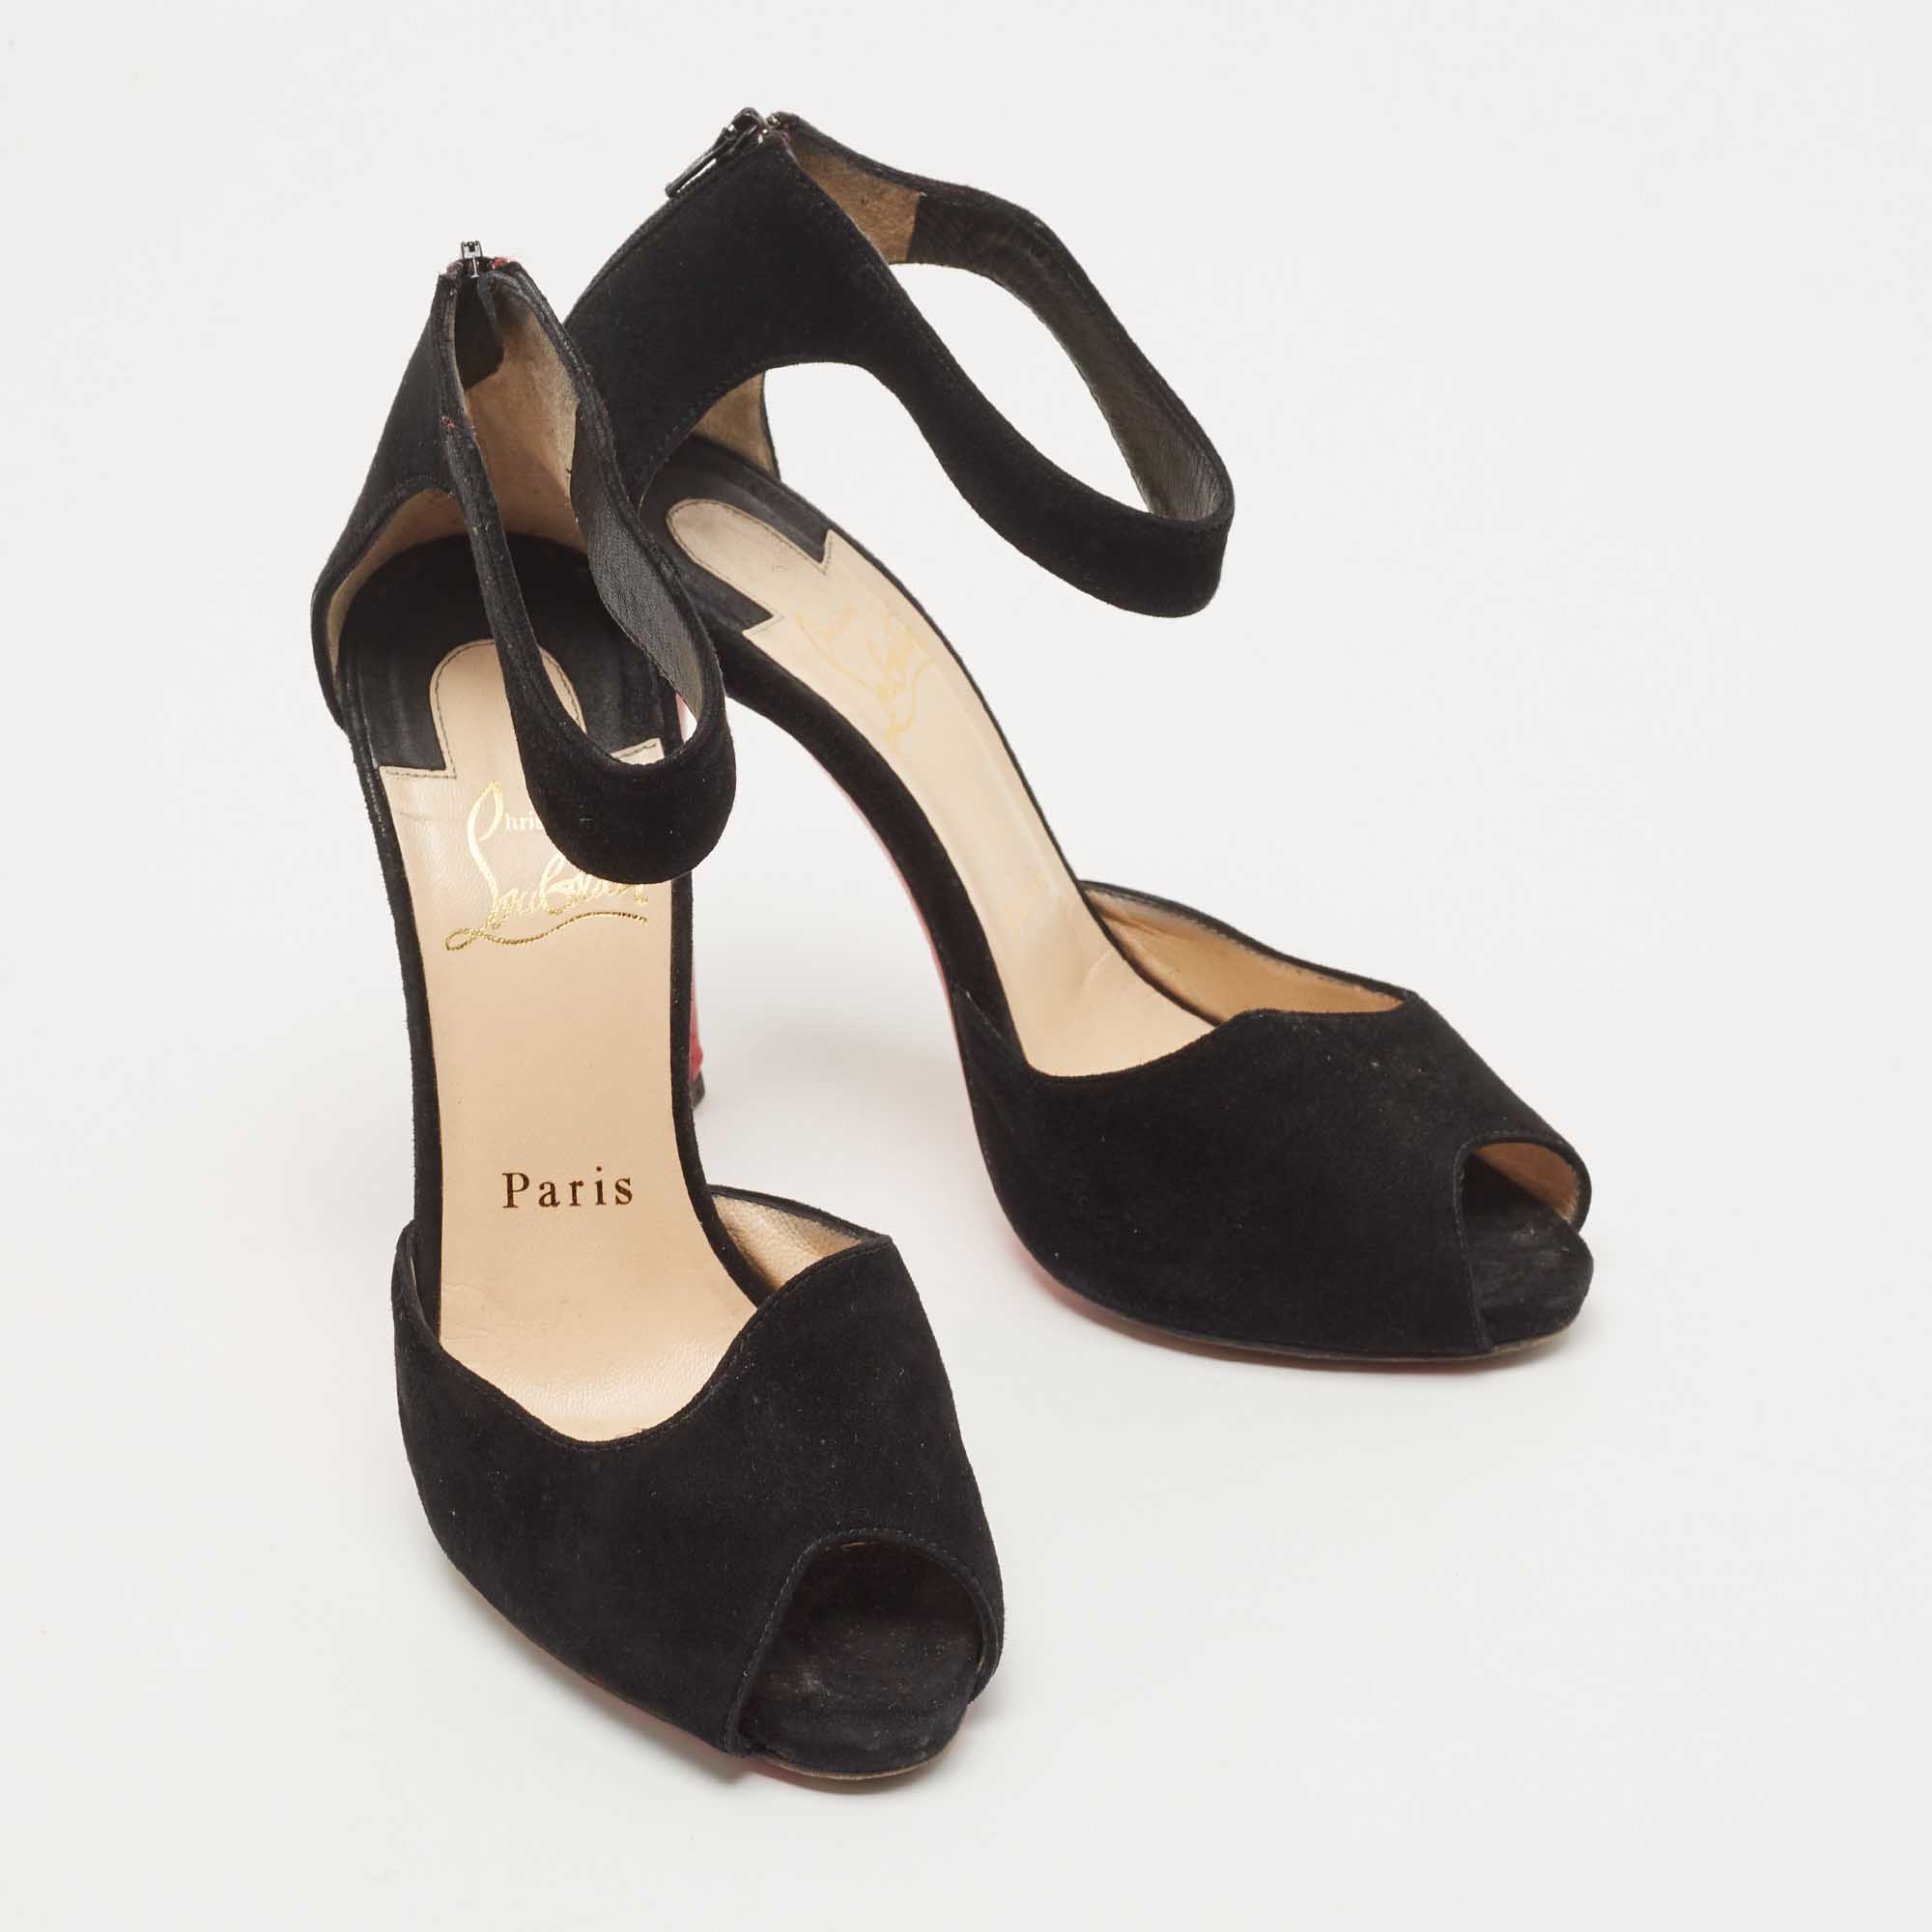 Christian Louboutin Black Suede Peep Toe Ankle Strap Sandals Size 36